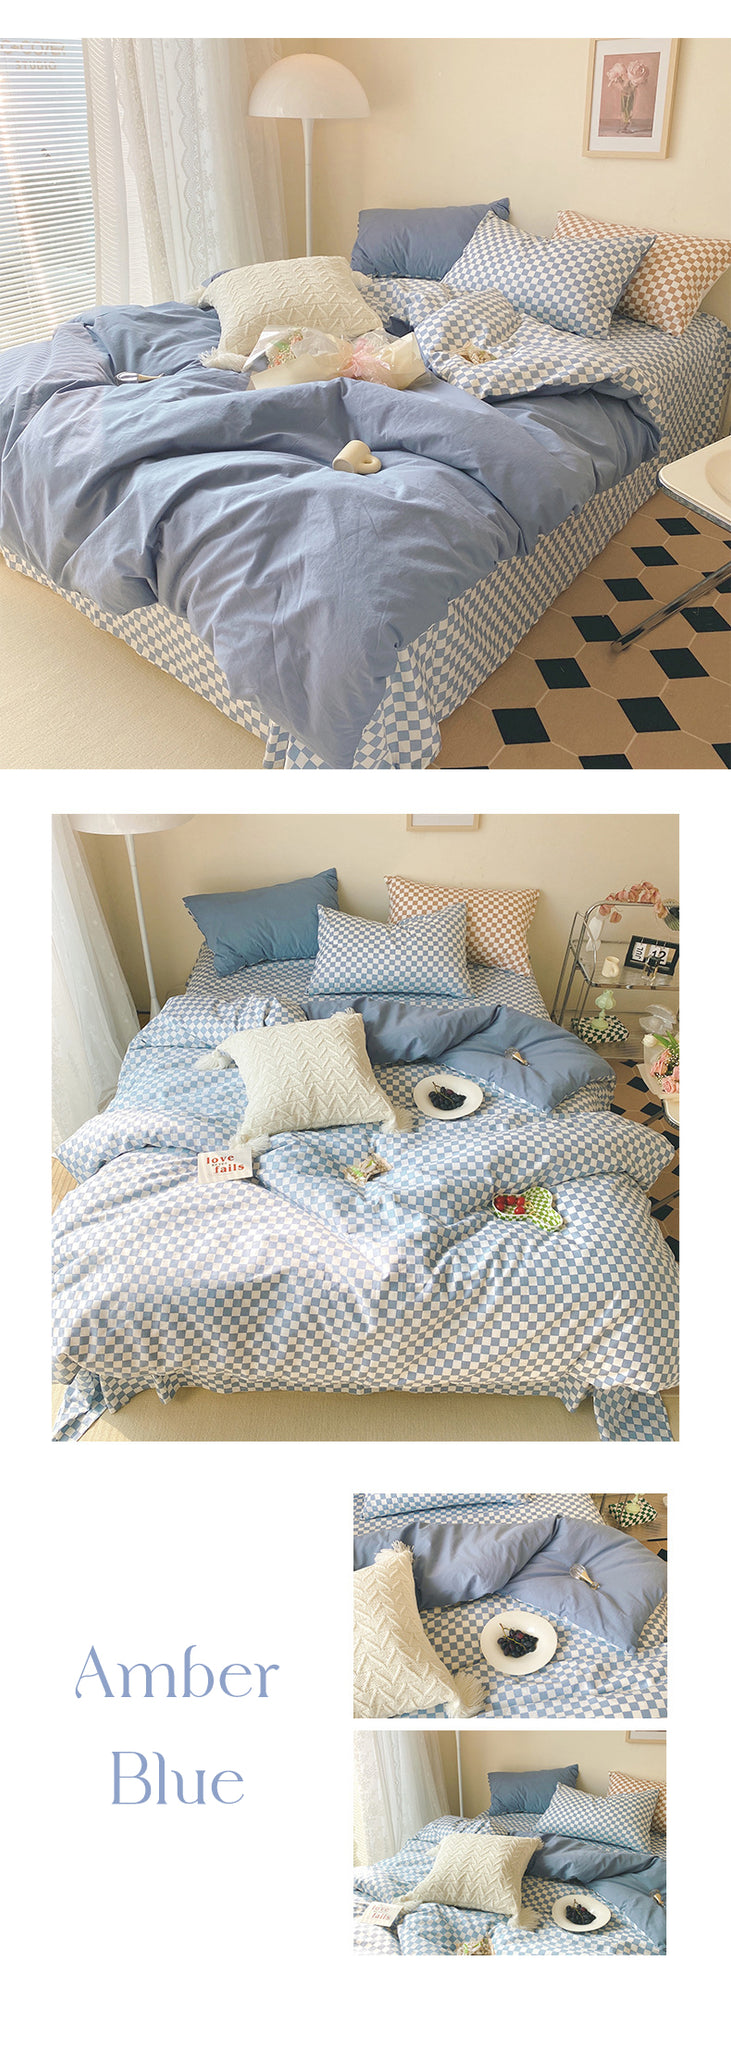 Blue Checkered Pattern Bedsheets For Aesthetic Room